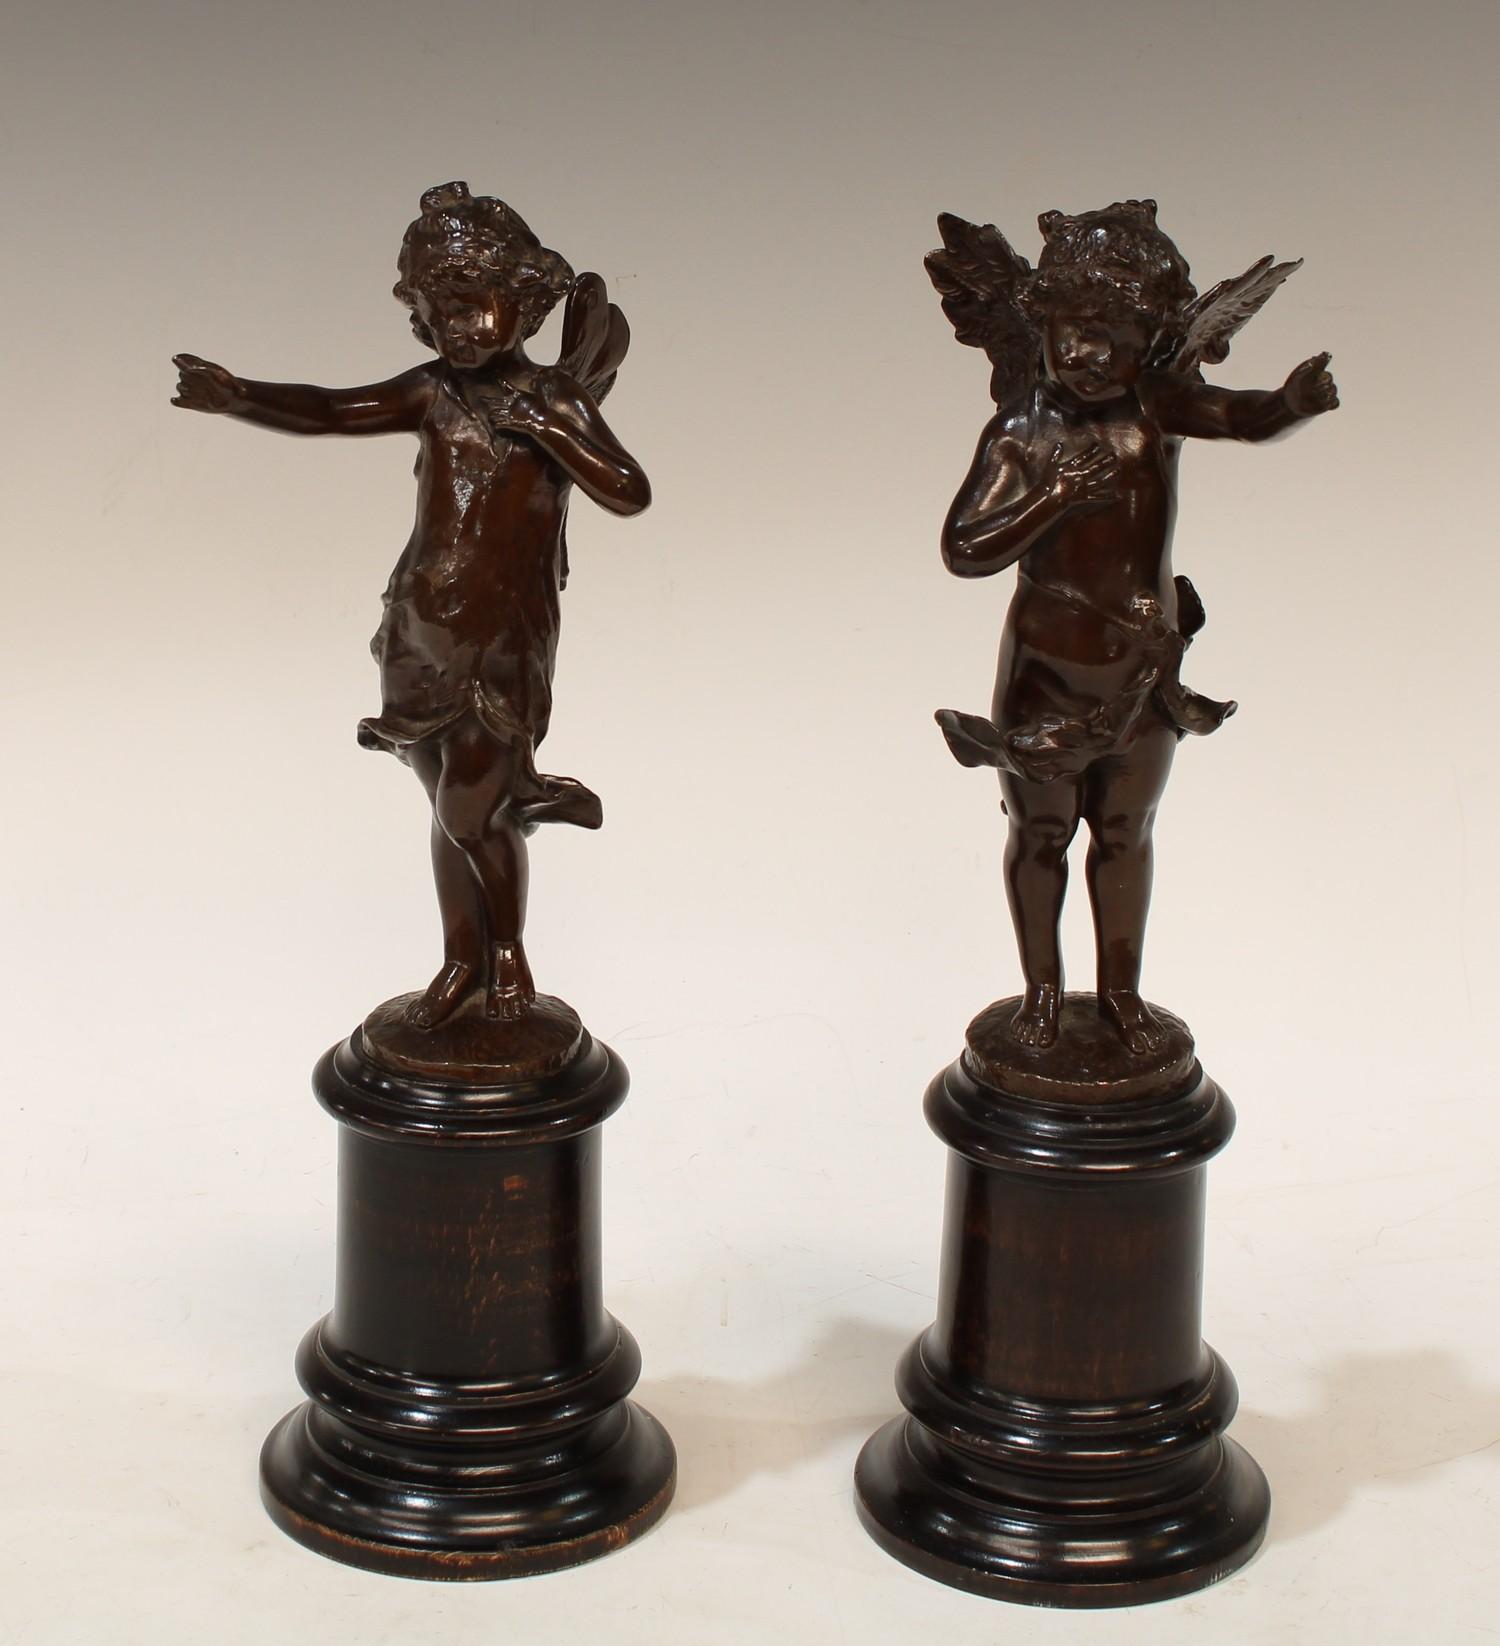 A pair of 19th century bronze figural spill vases, standing with arm raised, high ebonised